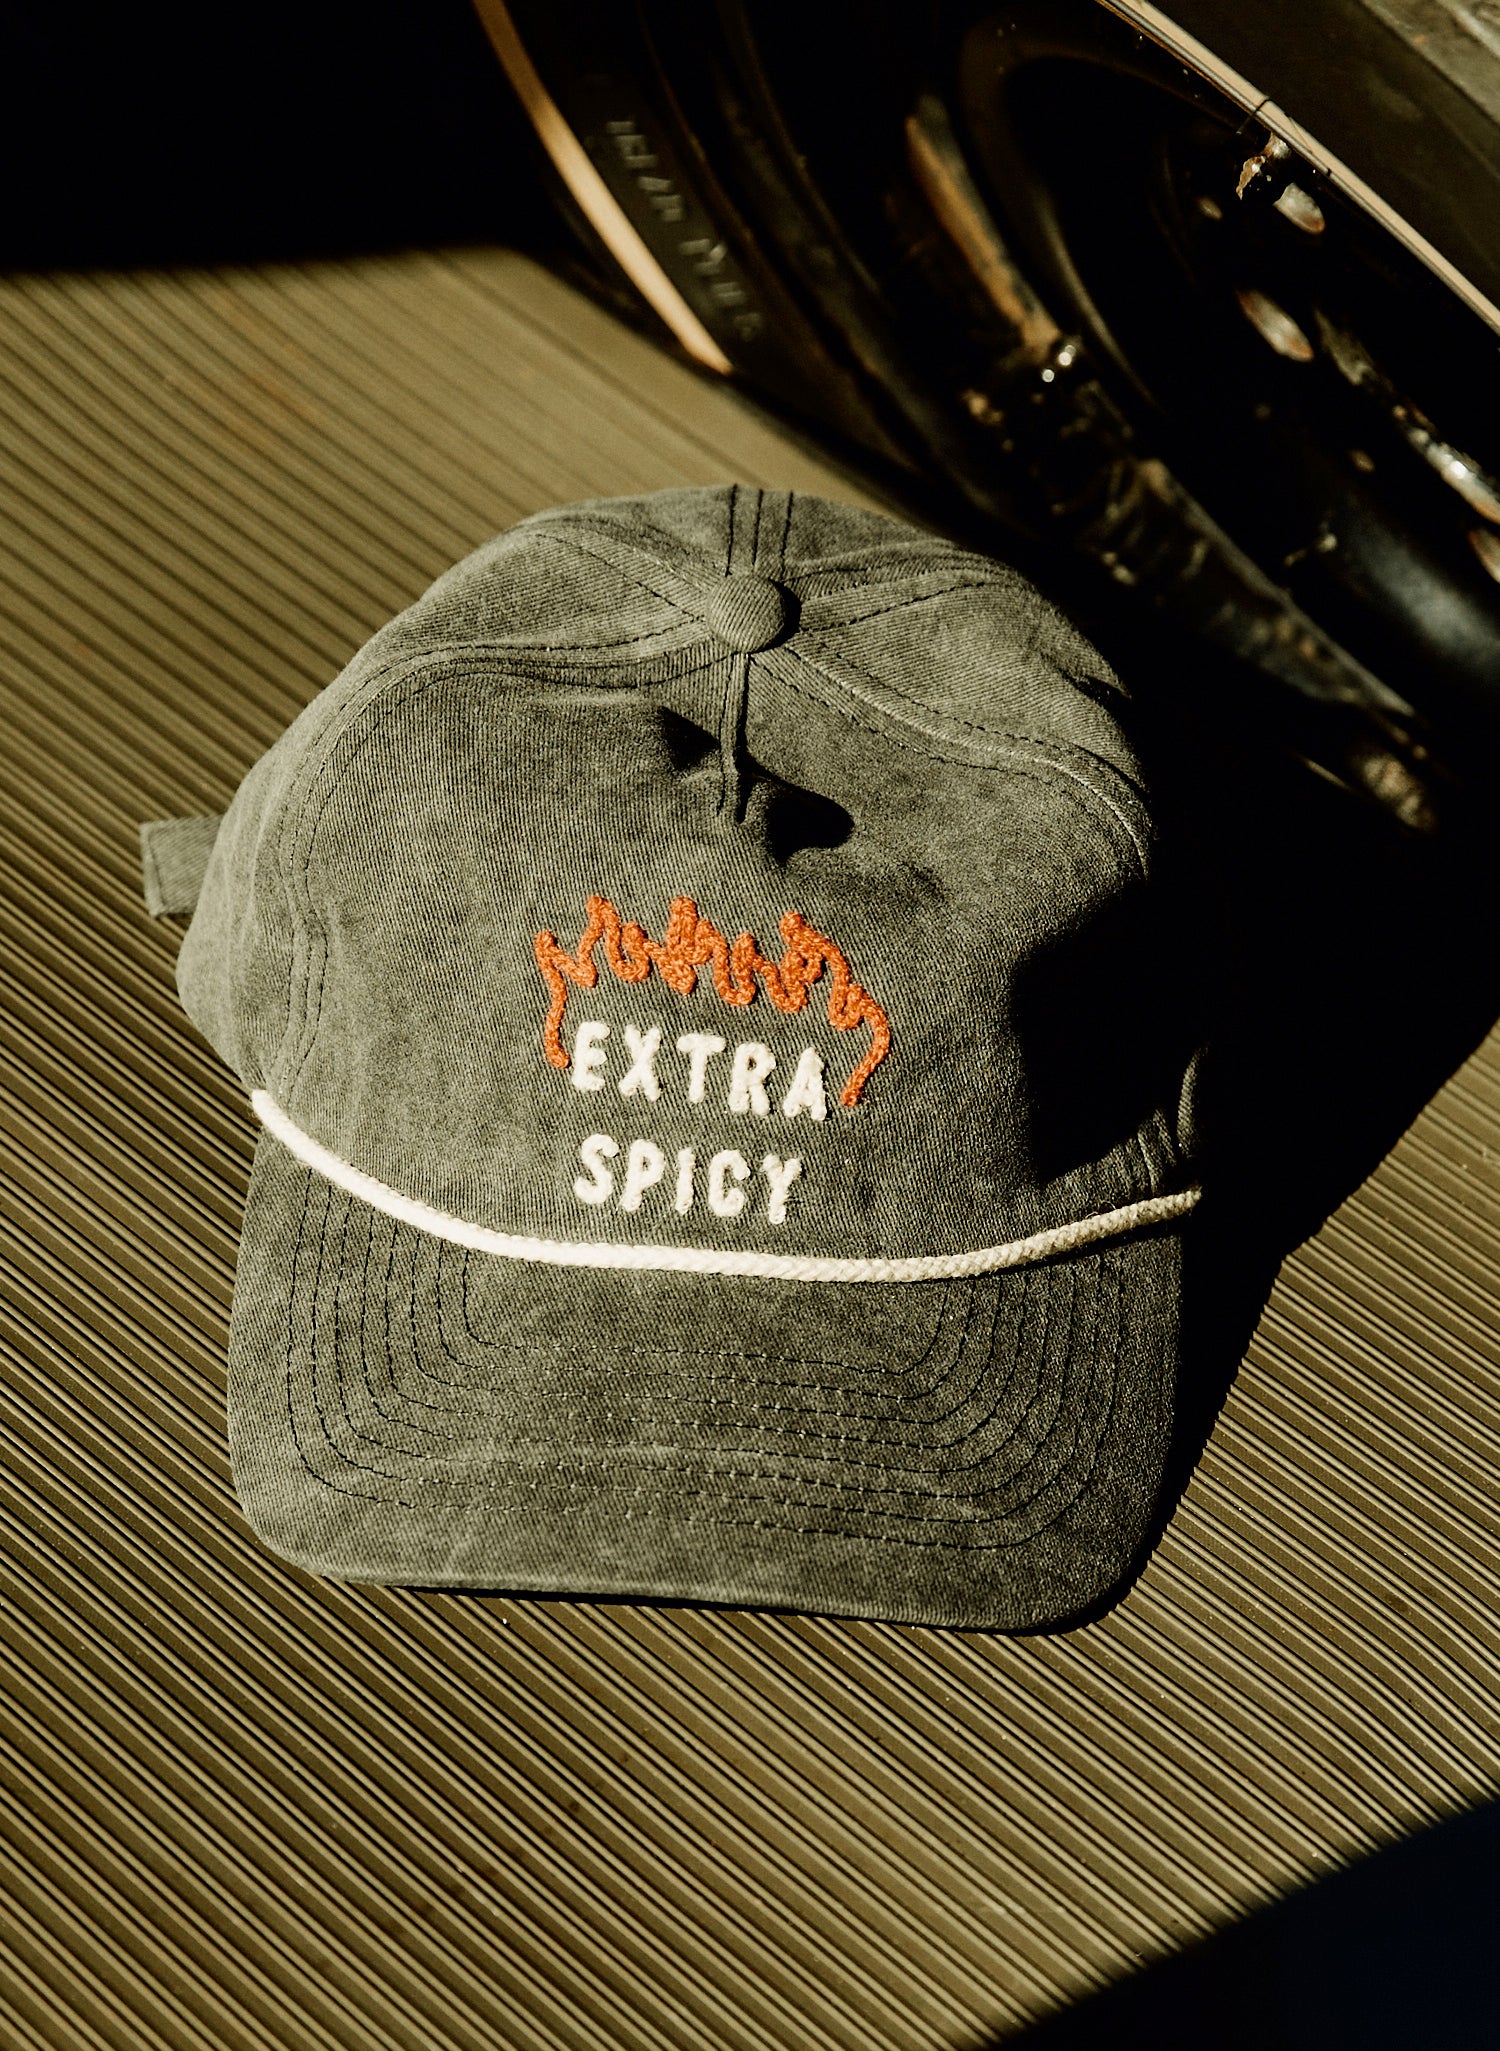 Extra Spicy Heat Flames Chainstitch Vintage Trucker Rope Hat - Food, Foodie, Chipotle, Chili Peppers, Hot Sauce Cap